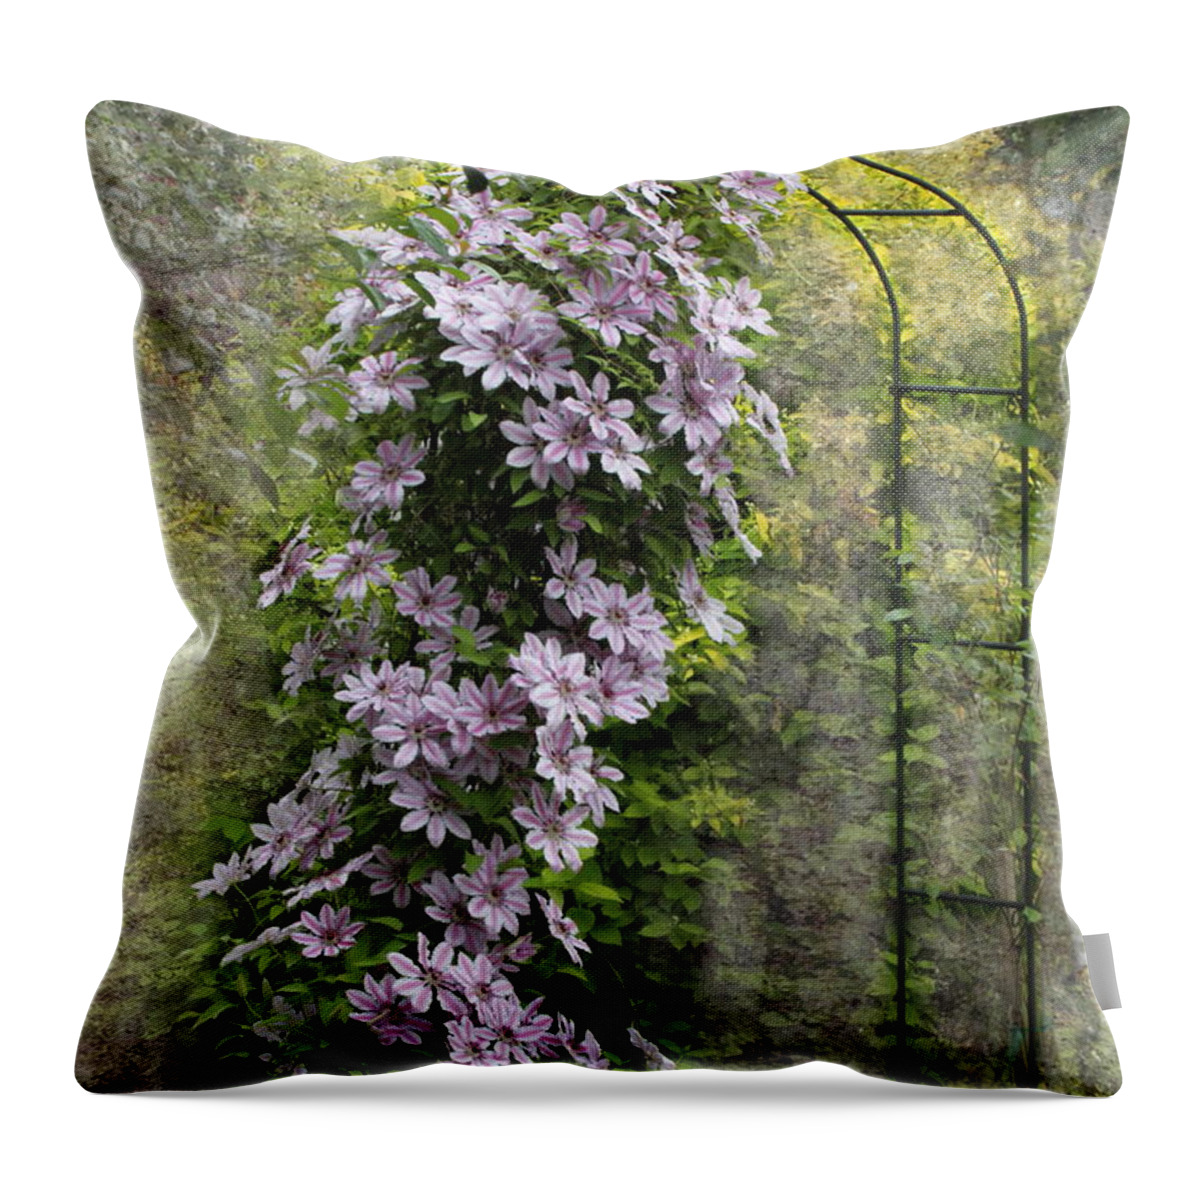 Clematis Throw Pillow featuring the photograph Climbing Clematis by Angie Vogel